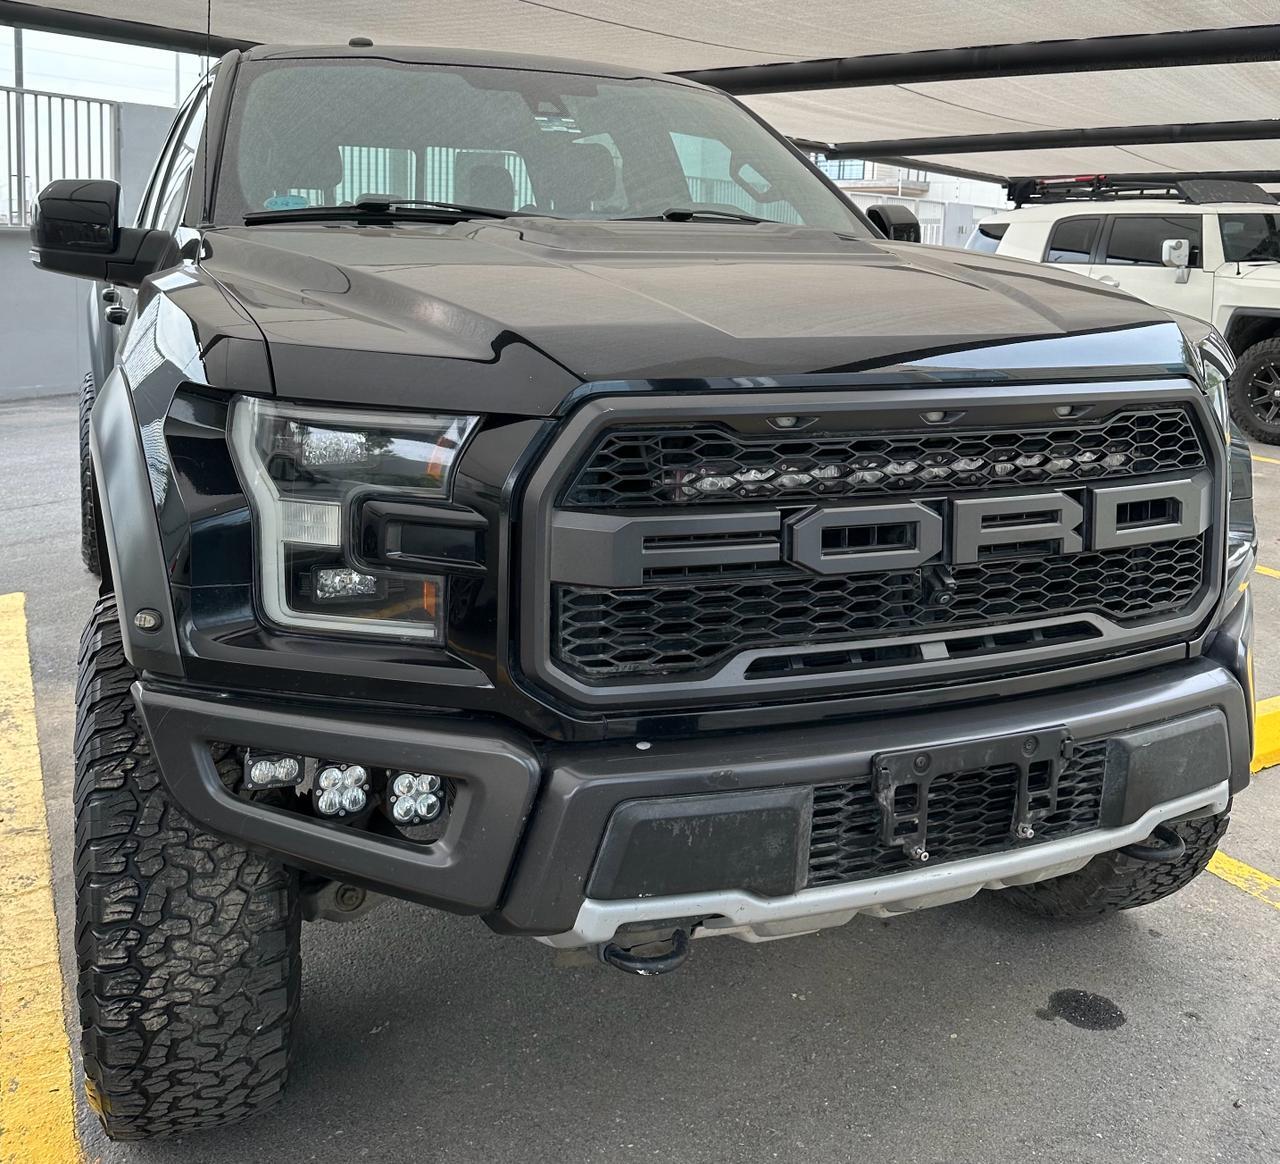 For Sale: 2017 Ford Raptor Truck  - photo1